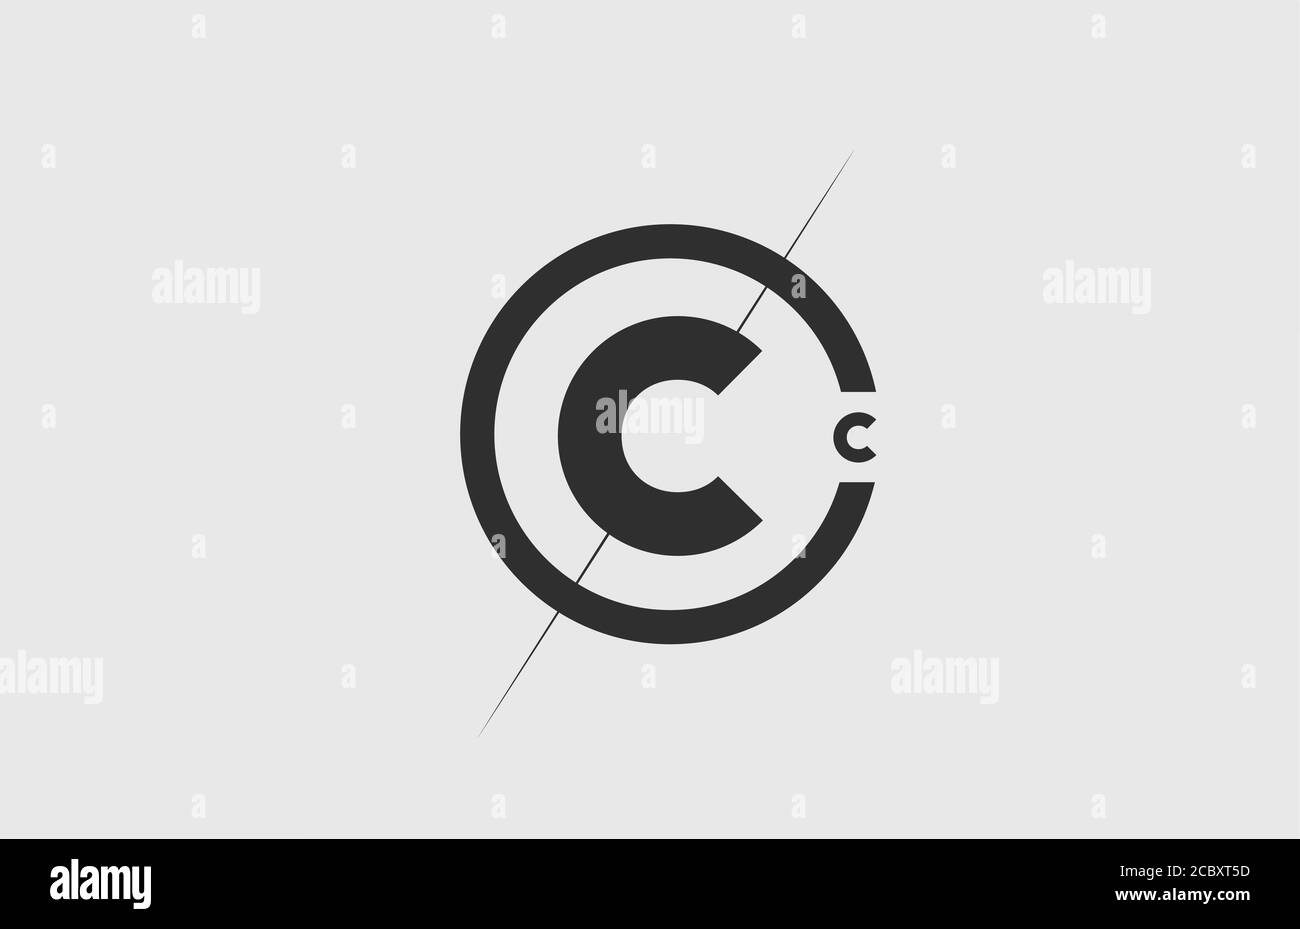 black white alphabet C letter logo icon. Simple line and circle design for company corporate identity Stock Vector